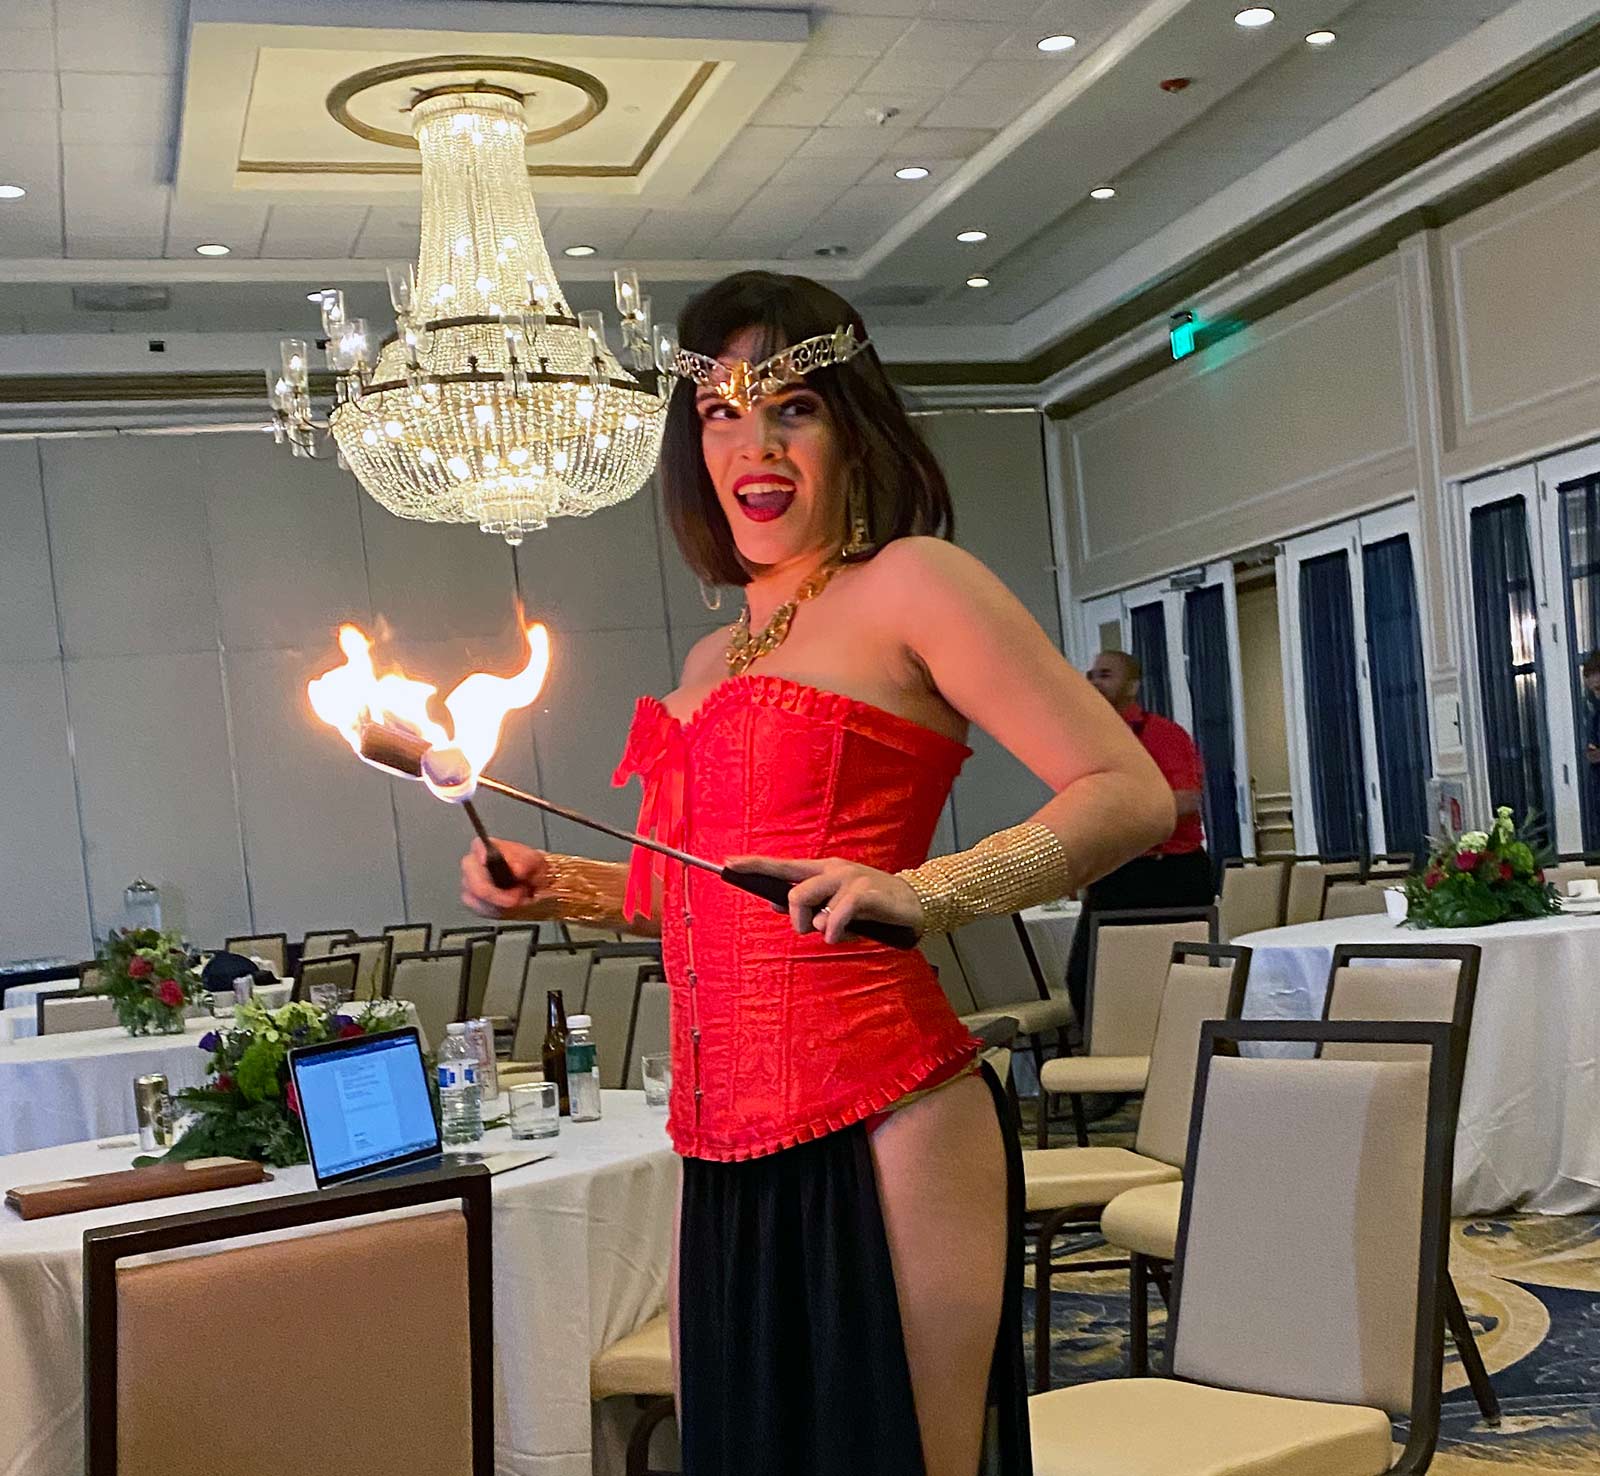 A fire dancer during a break at the Limitless conference at the Fairmont Hotel in San Juan.